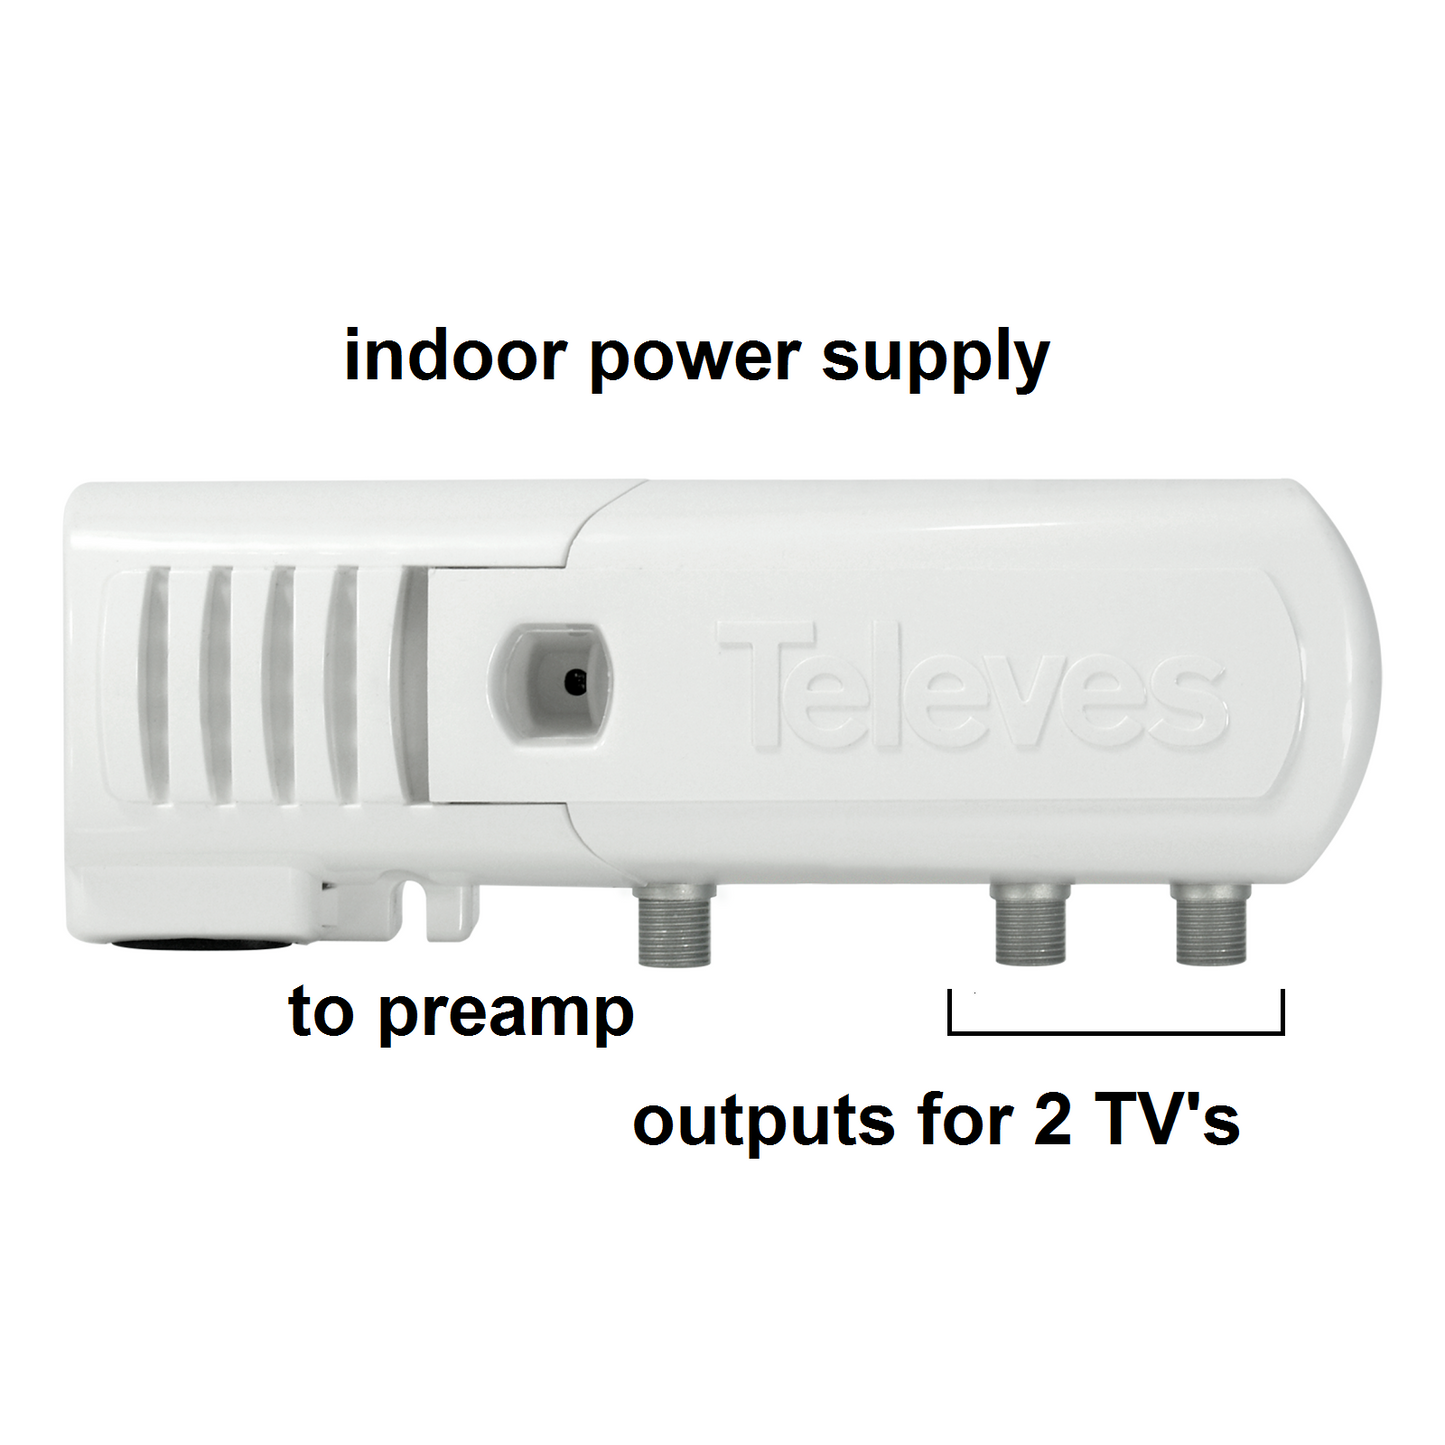 Televes 560383 Single Input Antenna Preamp, 5G Cell Filter, Coaxial F-fitting Connections, Automatic Gain Control (AGC)